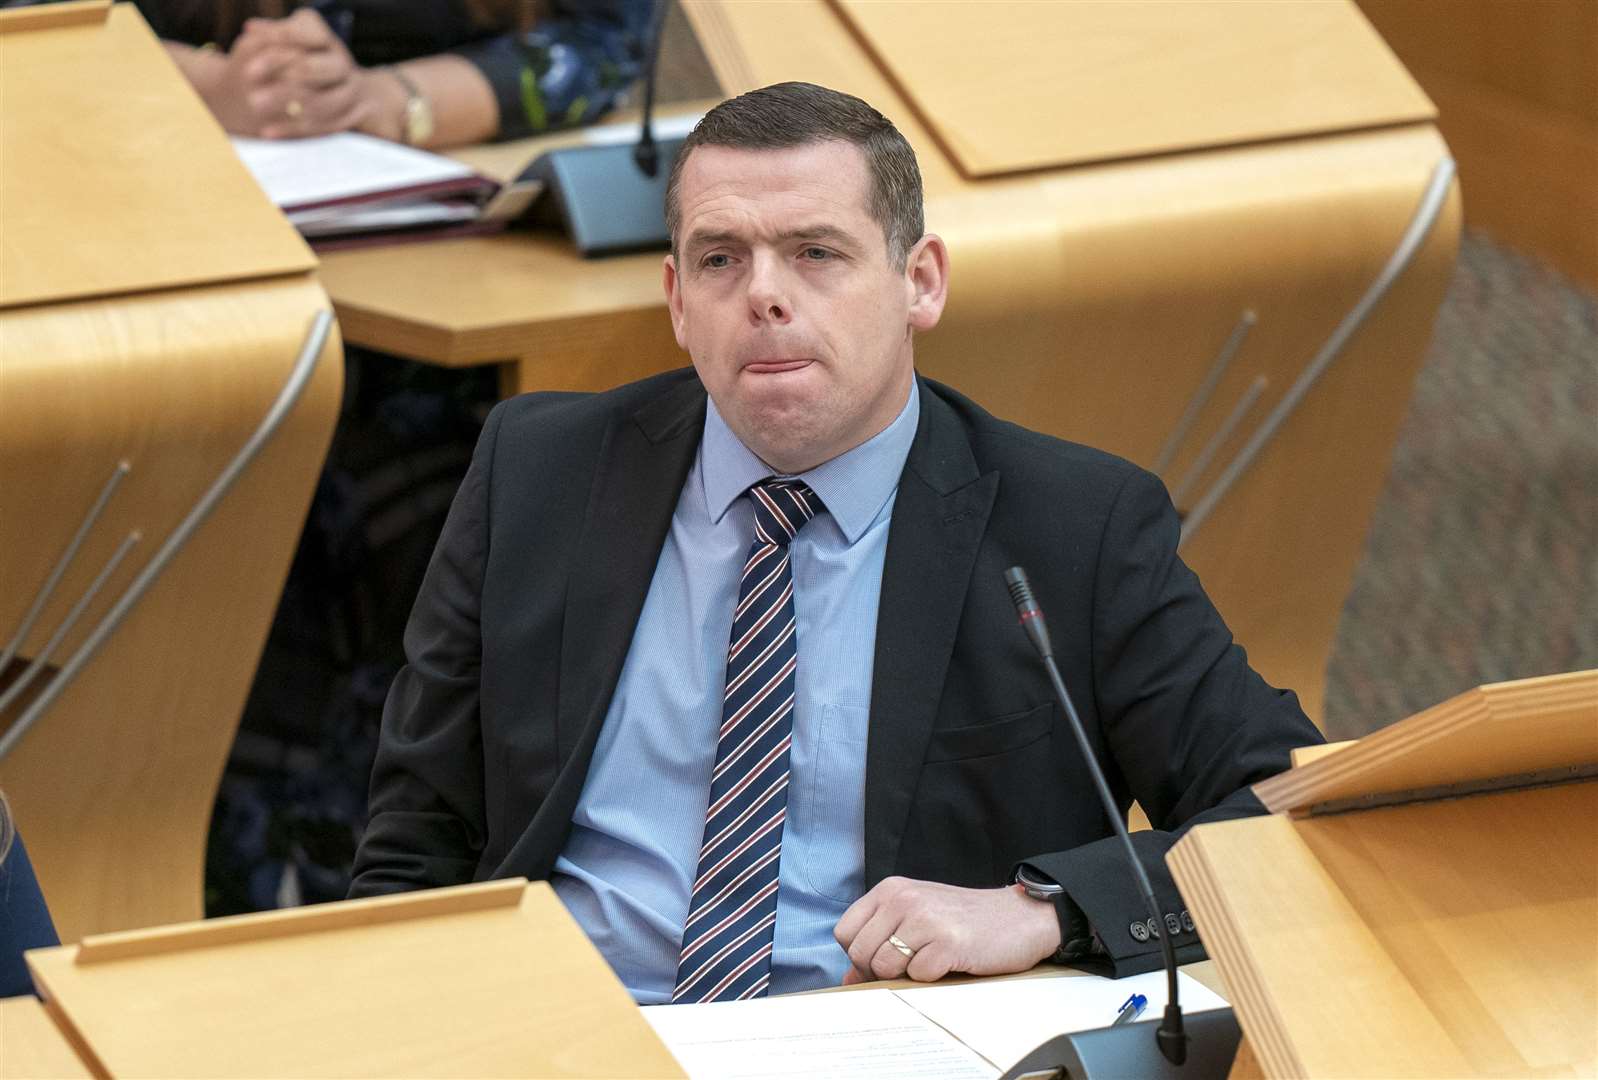 Scottish Conservative leader Douglas Ross accused the SNP of ‘secrecy, spin and cover ups’ (Jane Barlow/PA)